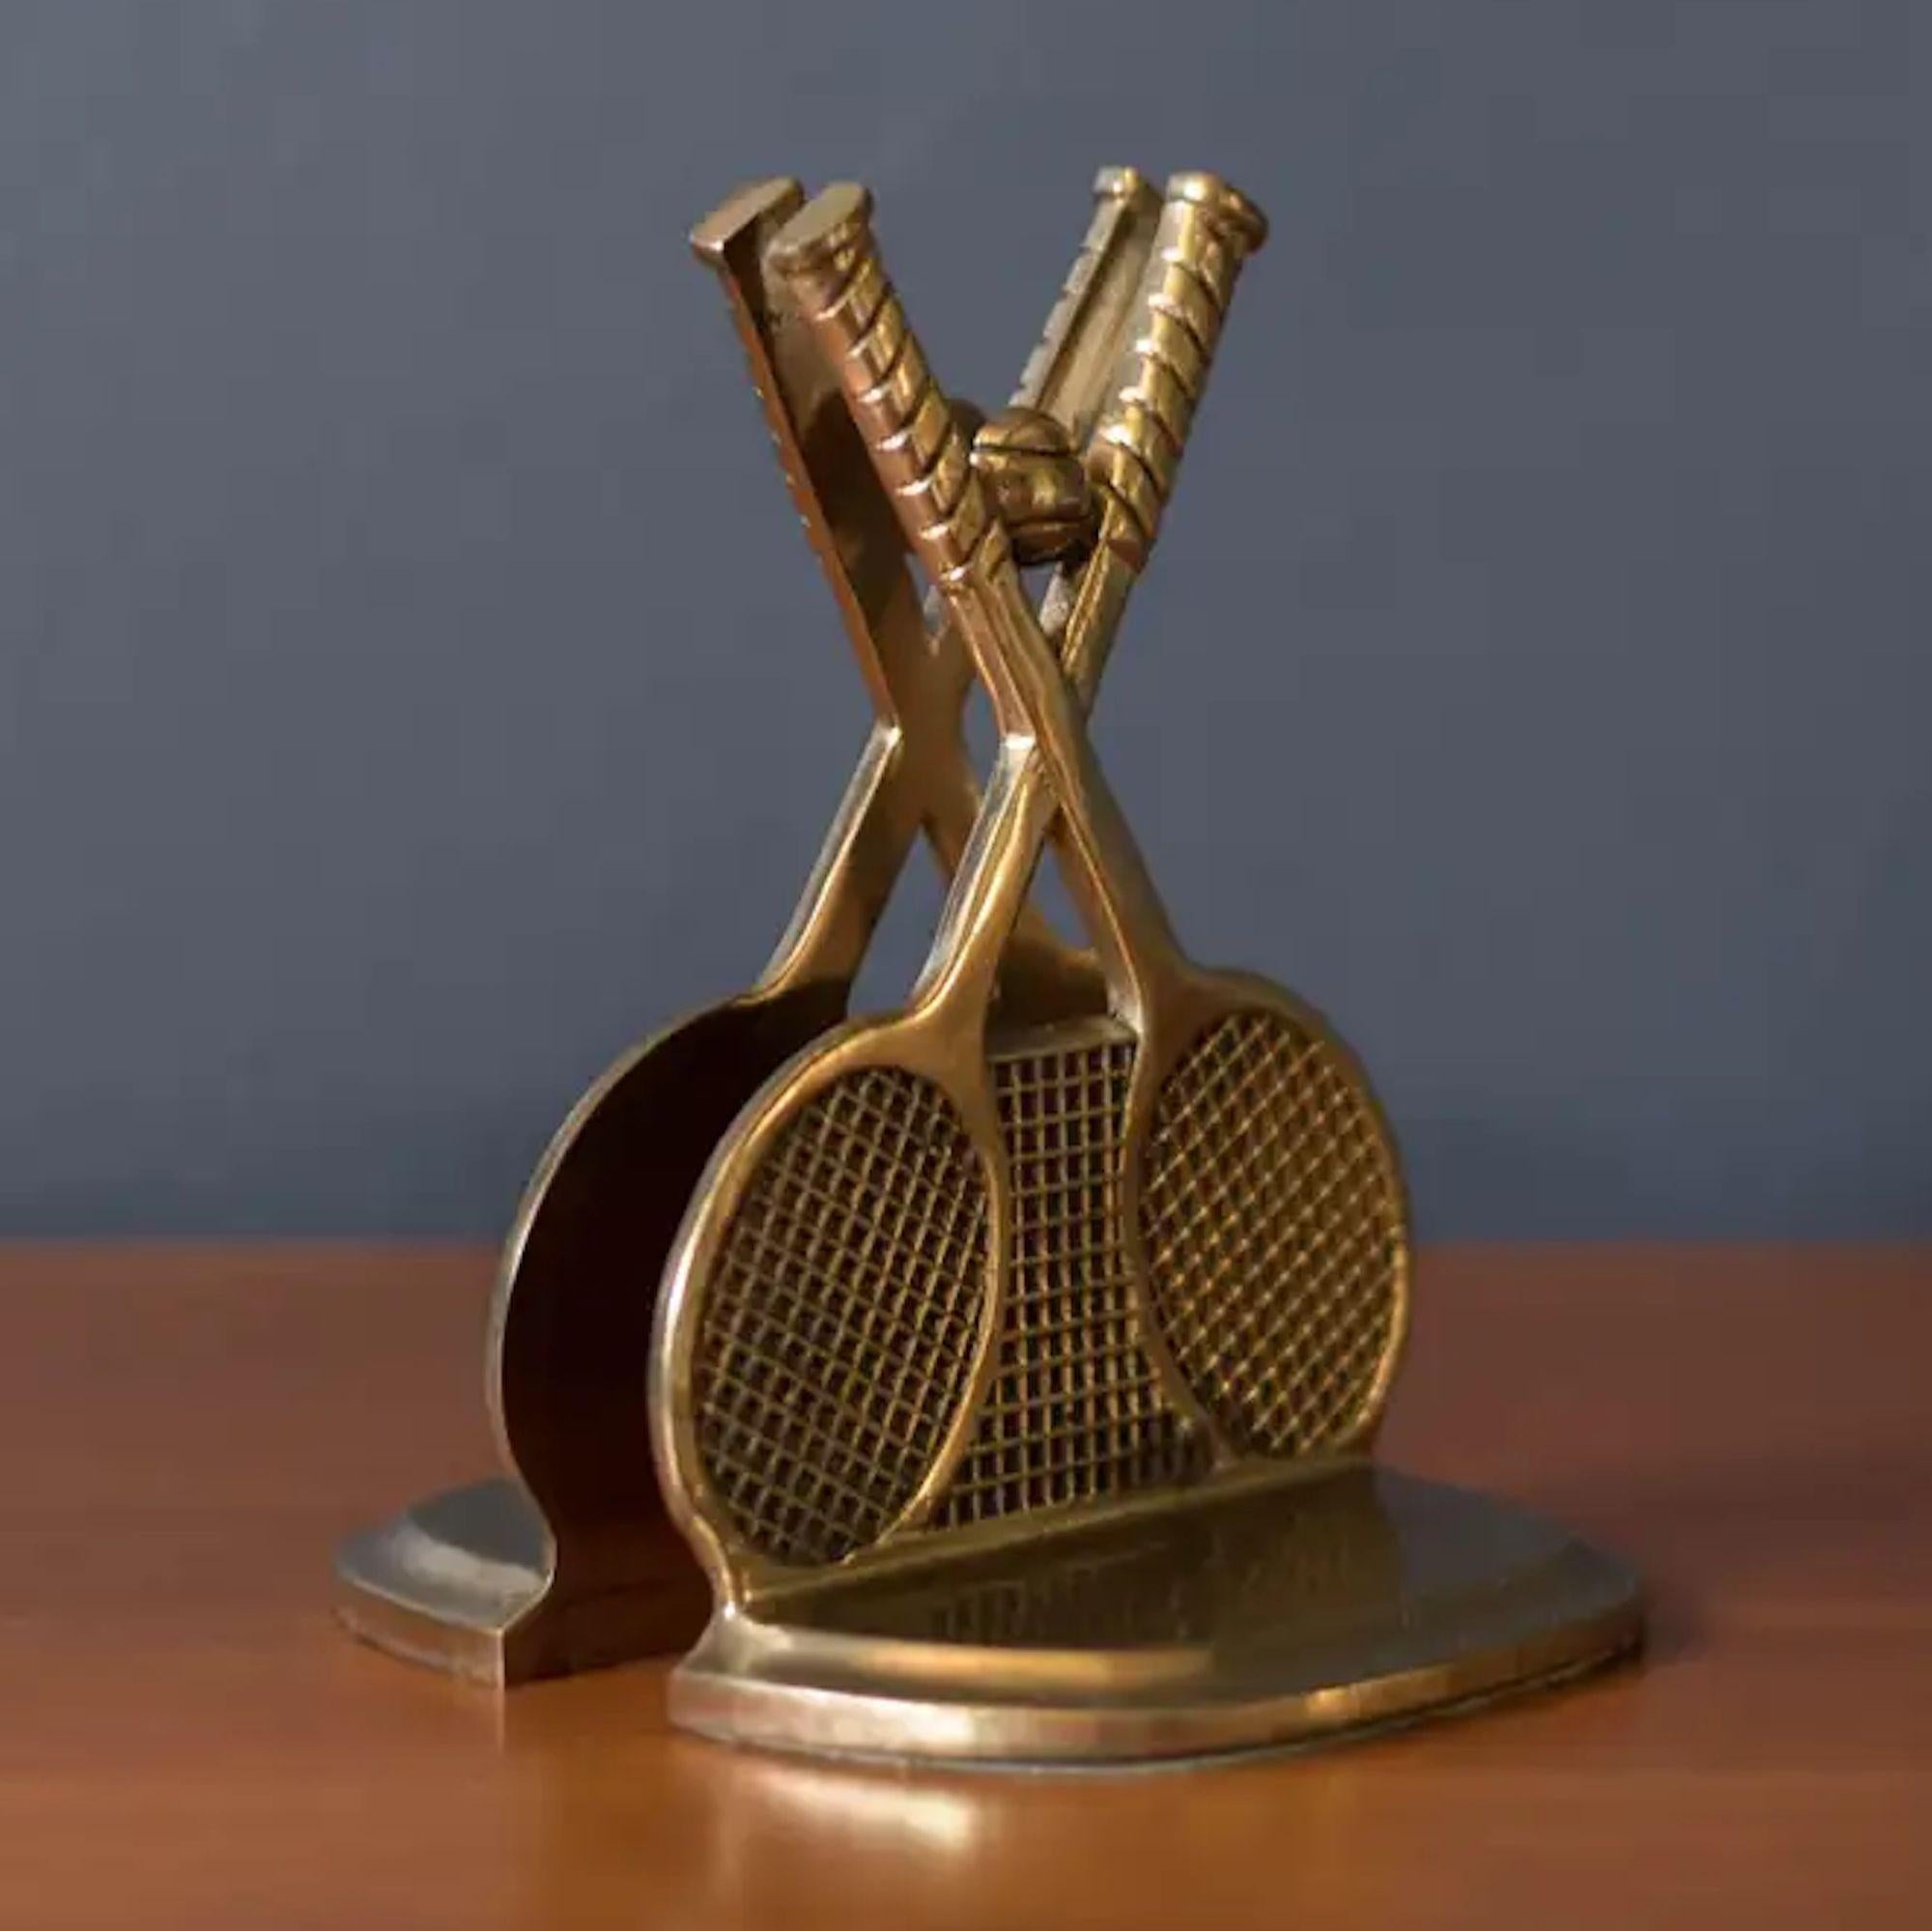 Cast Pair of Vintage Brass Tennis Racket and Ball Bookends Vintage 1970s Collectible